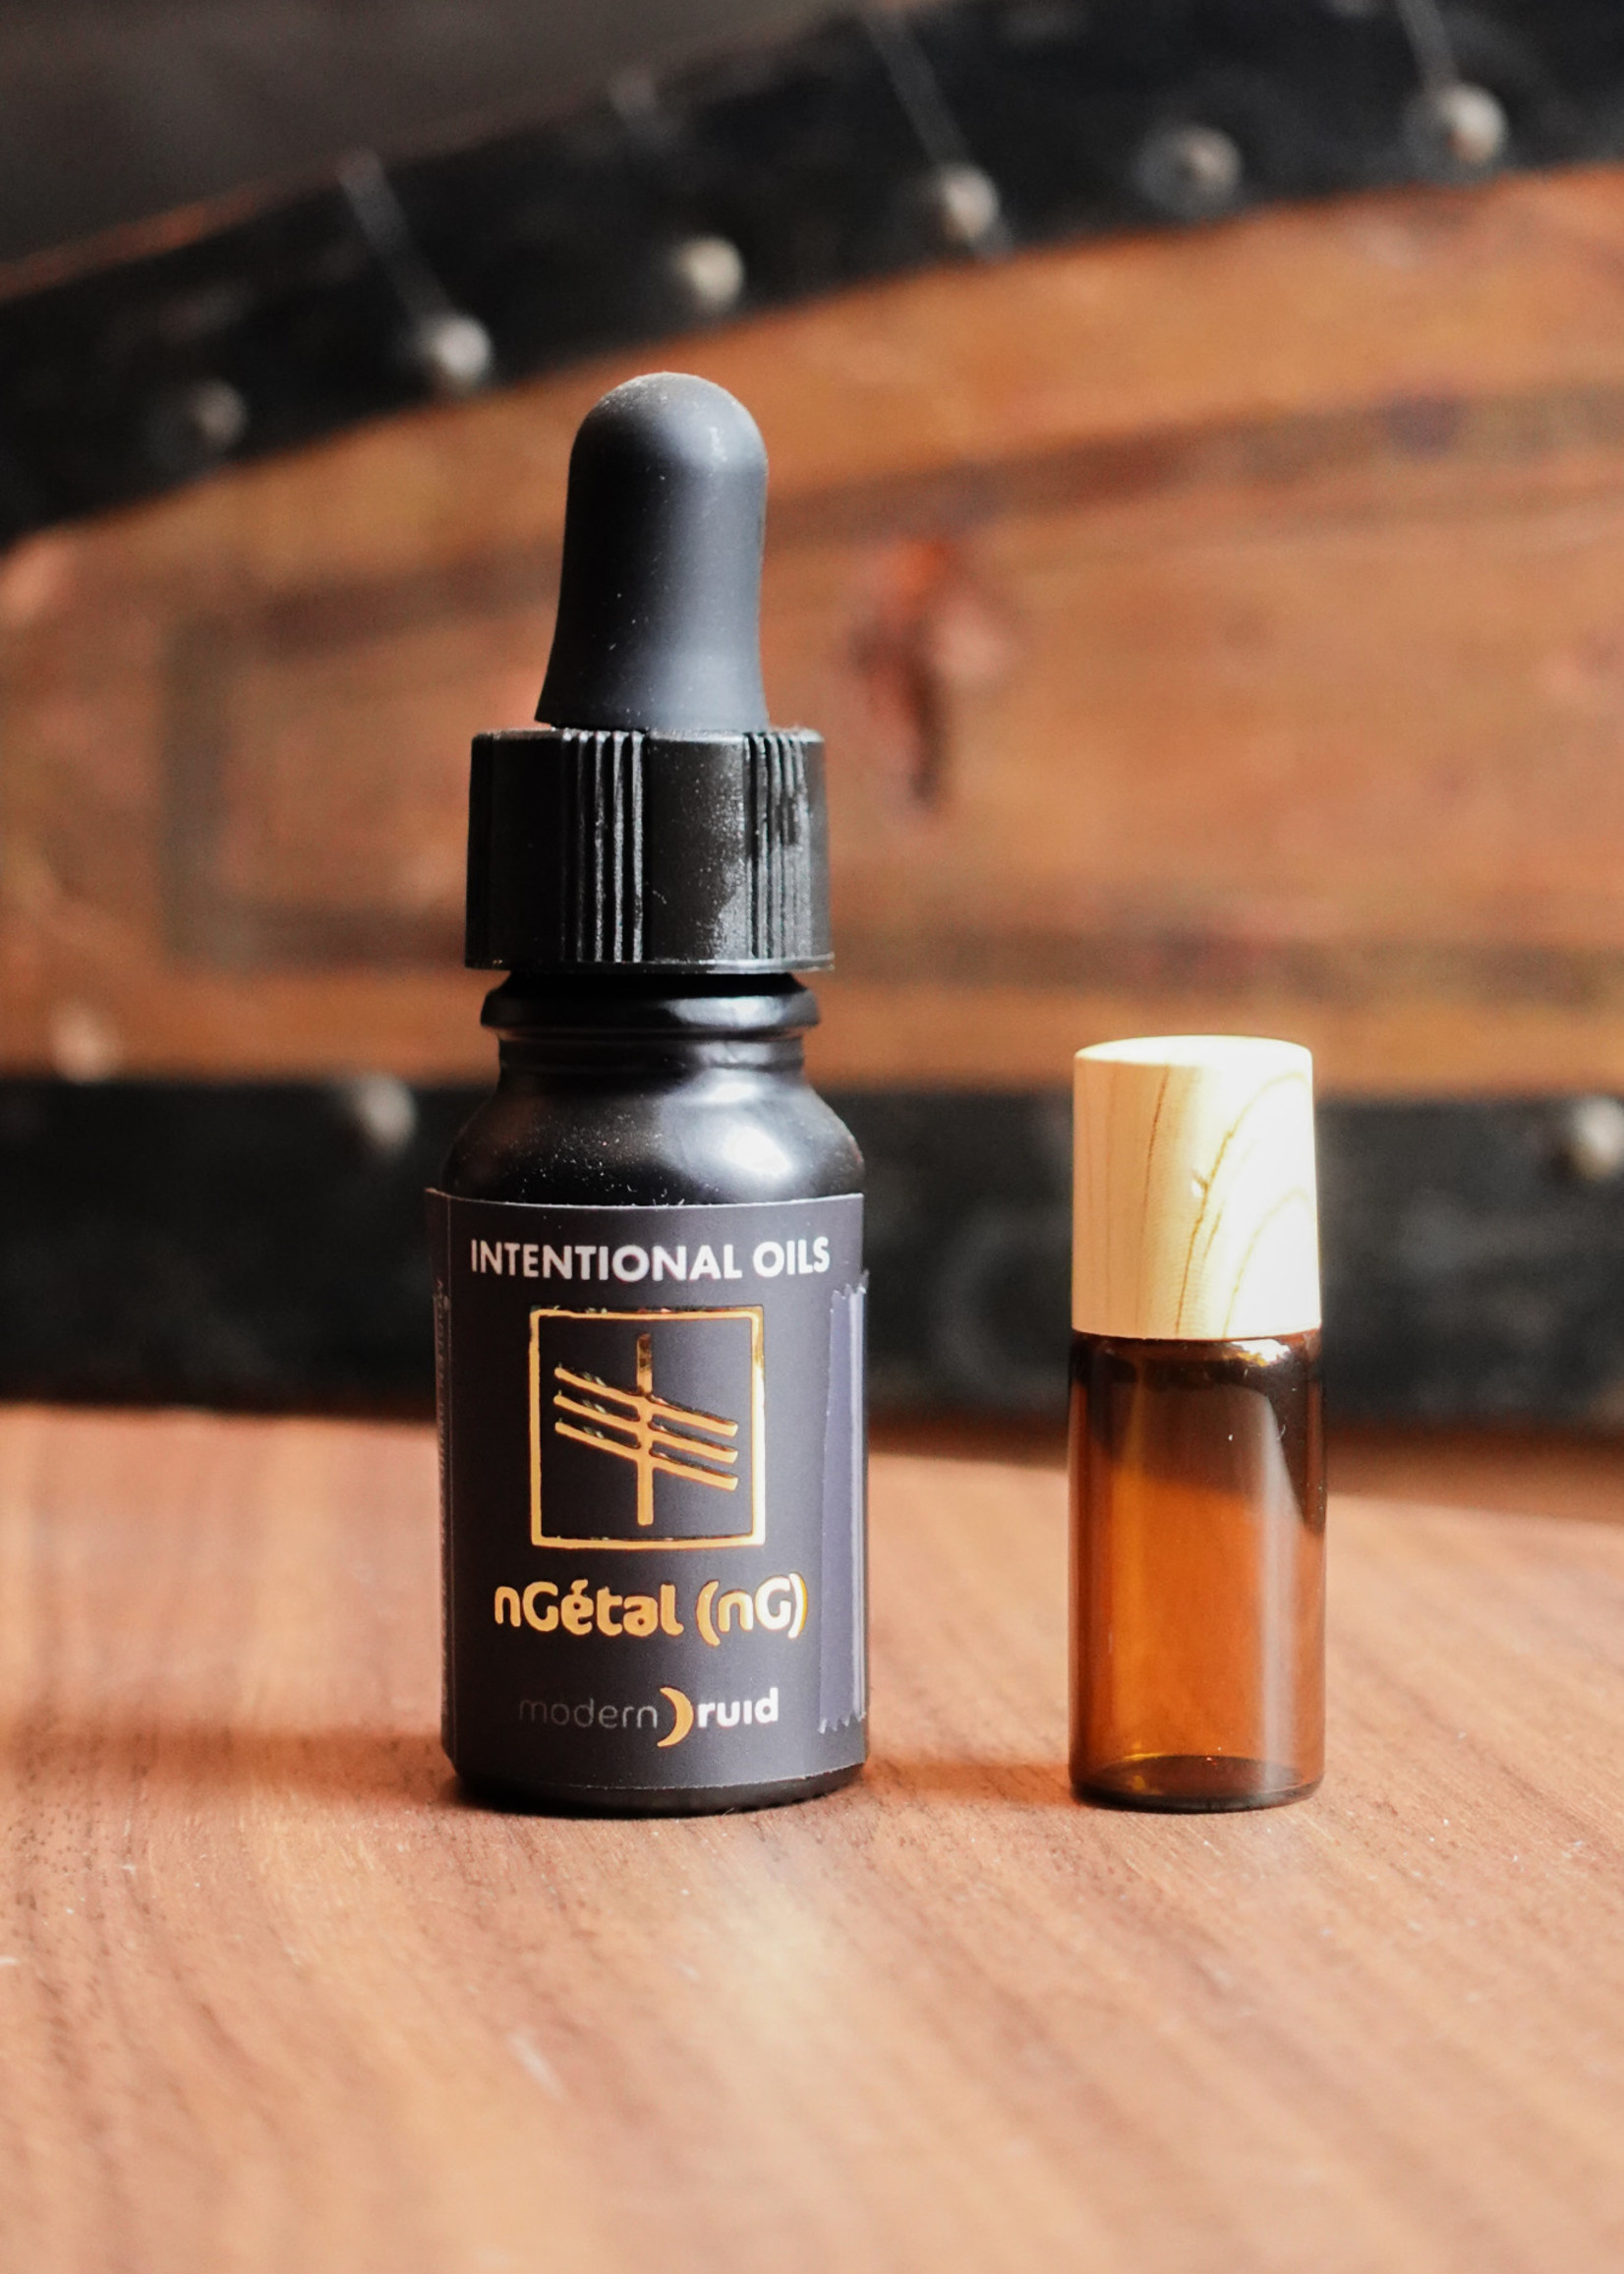 Modern Druid Ogham Oil: nGetal (nG) - Healing (Emotionally and Physically)